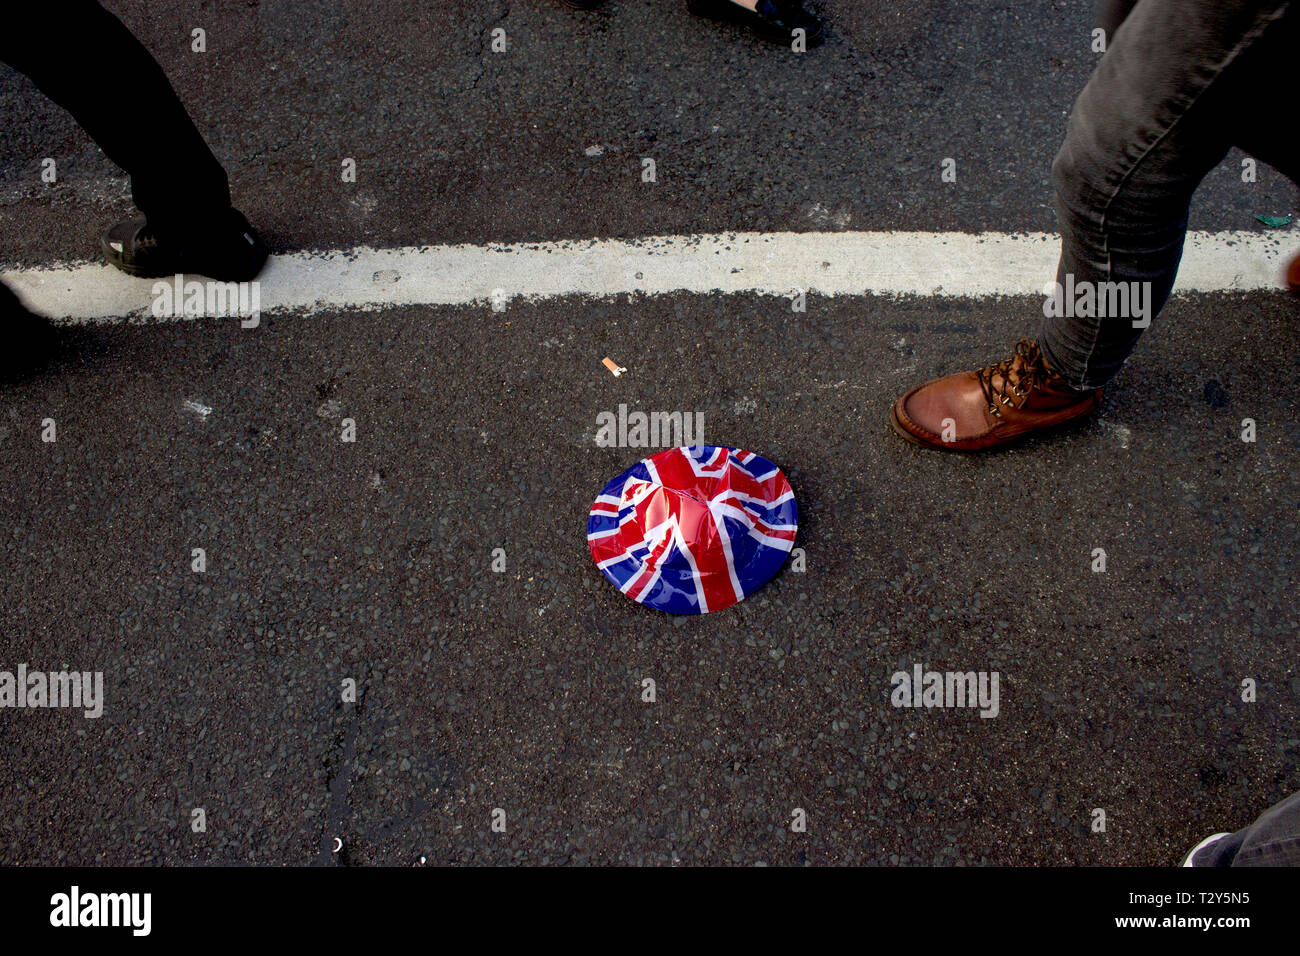 Pro-Brexit demonstration - British hat on the floor Stock Photo